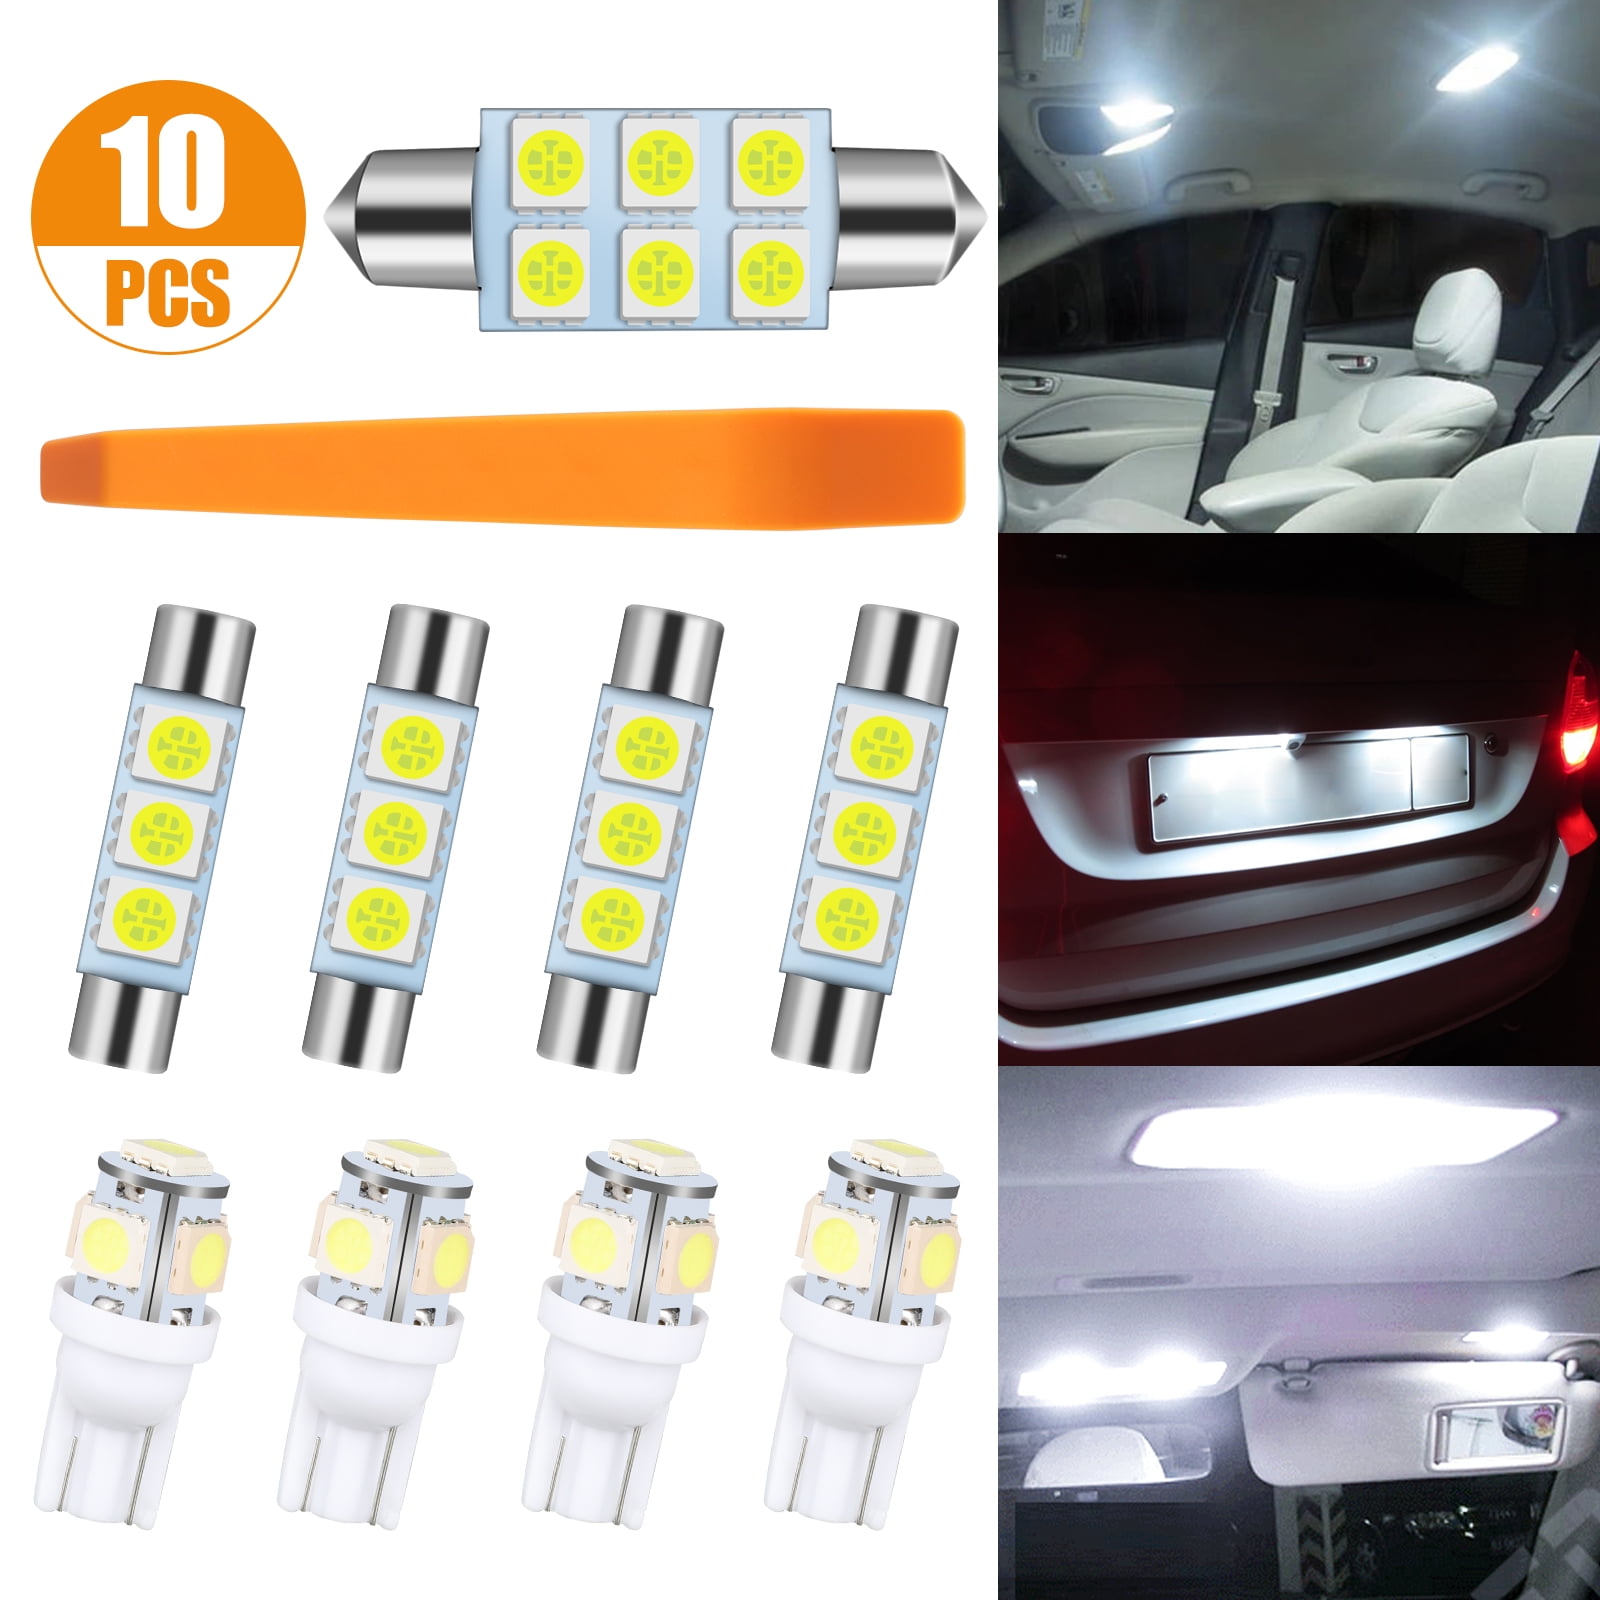 PHILIPS LED 194/168/T10/W5W 6000K X 2 SETS BULB INTERIOR LICENSE PLATE LAMP  FIT